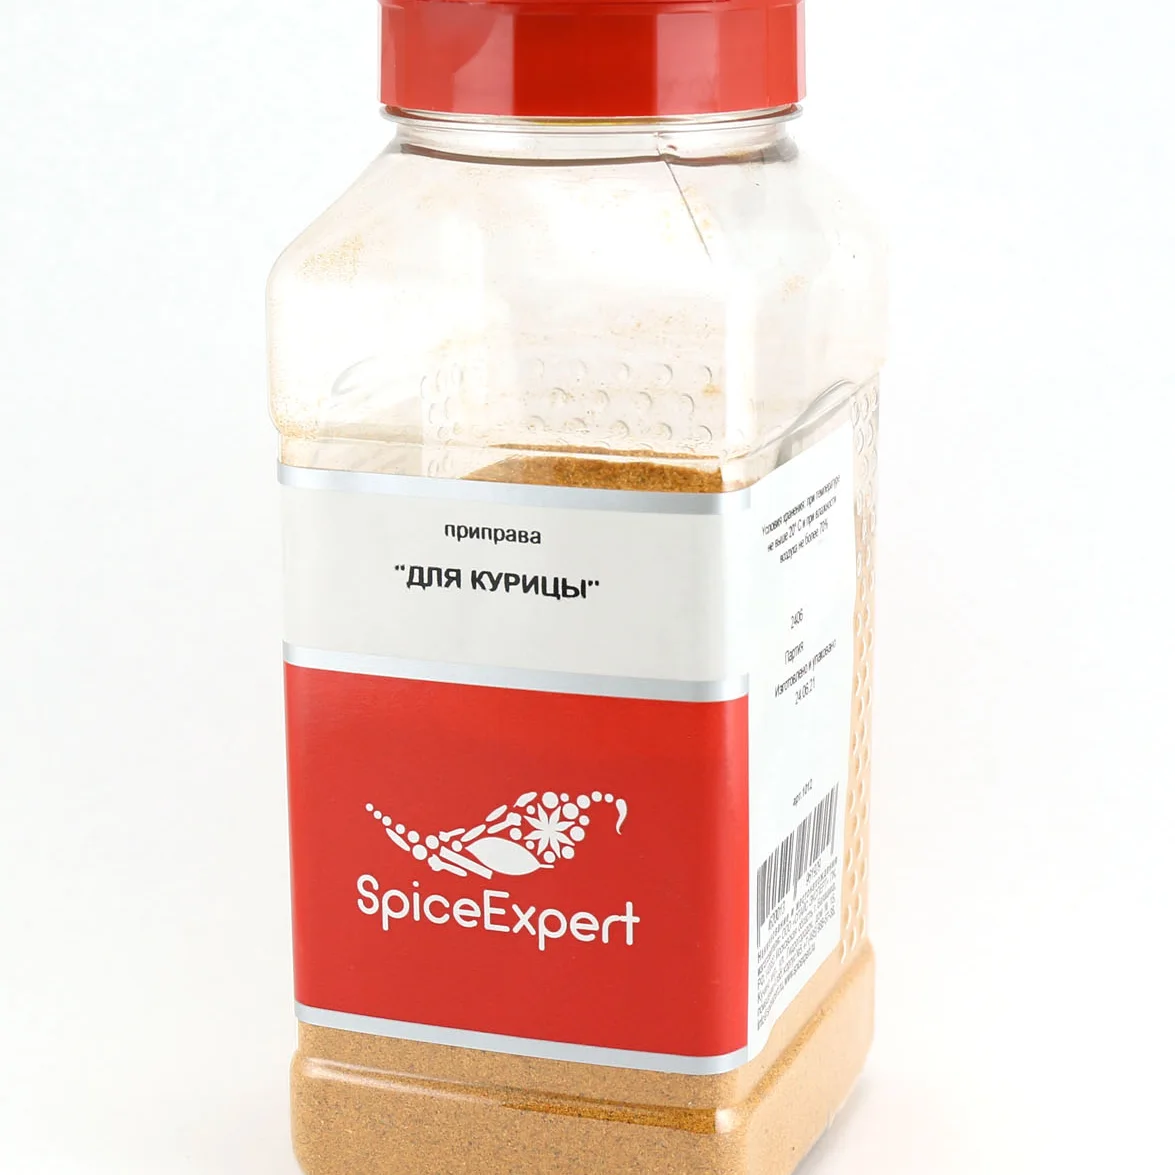 Seasoning "For chicken" 500g (1000ml) can of SpicExpert